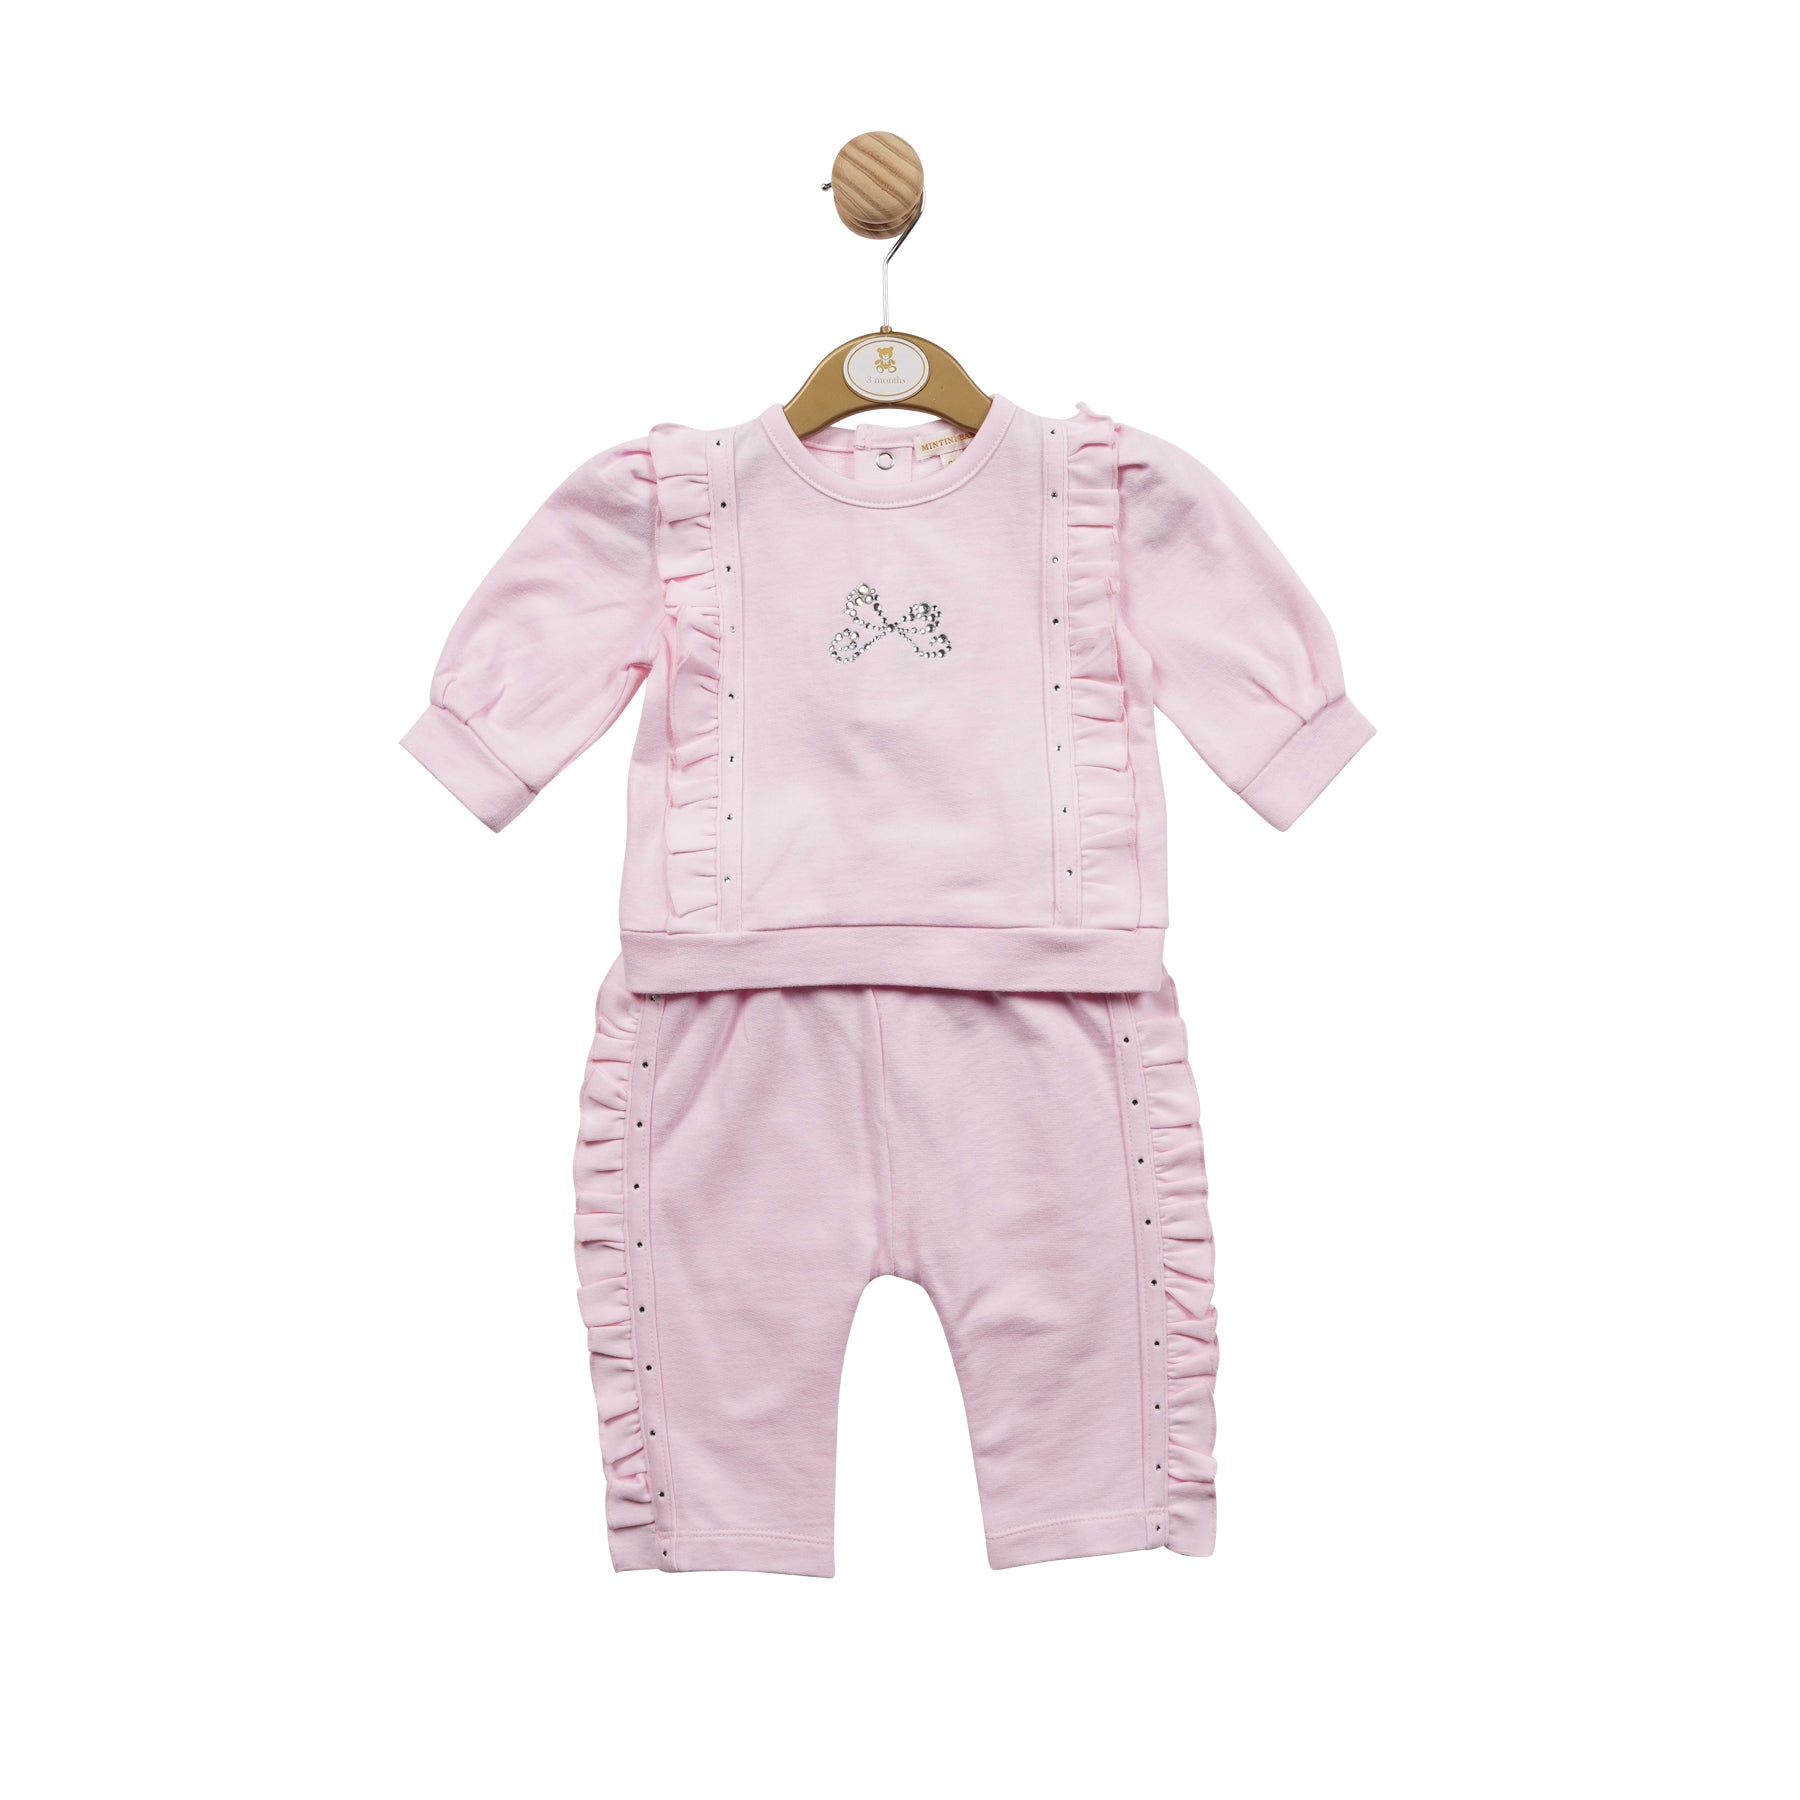 This stylish two piece set from Mintini Baby will have your little girl looking adorable. The soft pink set features a top with a diamanté bow detail and comfortable jogger trousers. Available in sizes 3 month up to 24 month. Sophisticated and sweet looks like this are hard to resist.